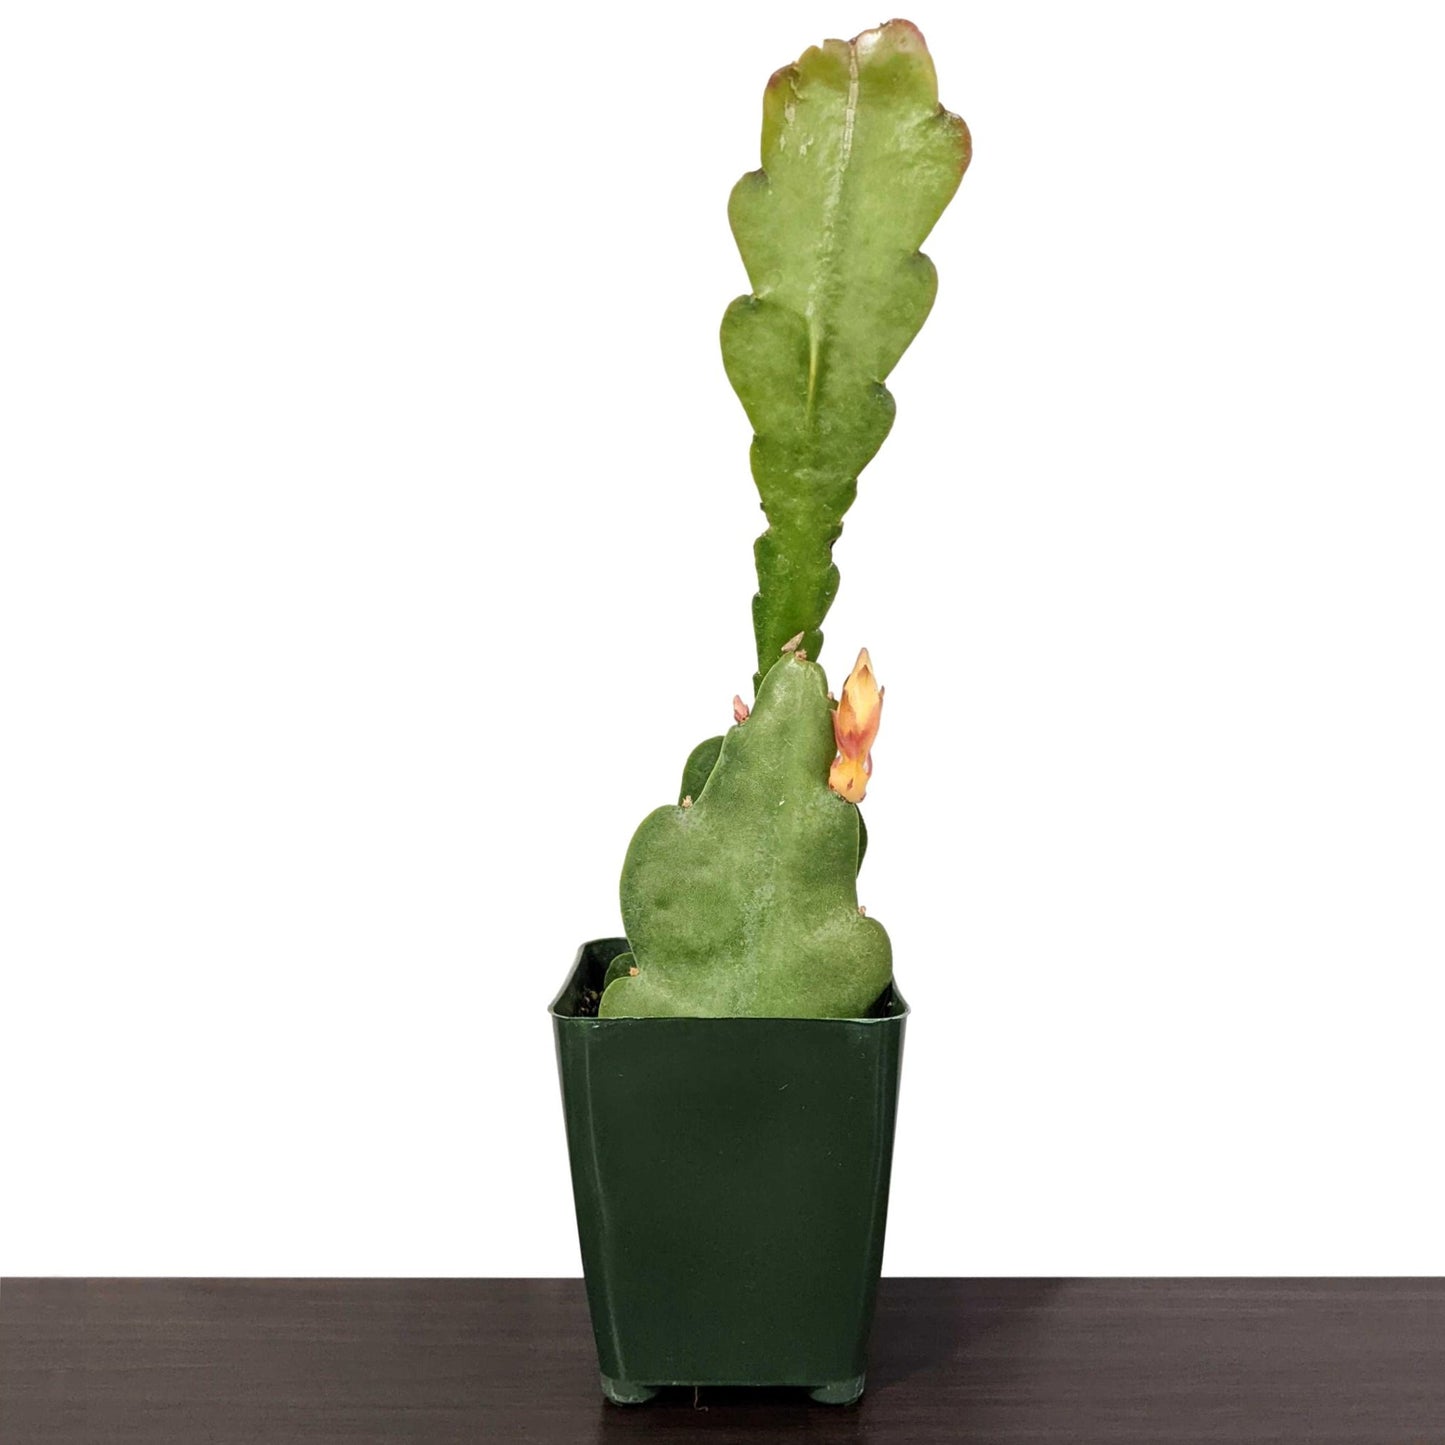 Epiphyllum Orchid Cactus - Shipped as Shown in Grower's Pot